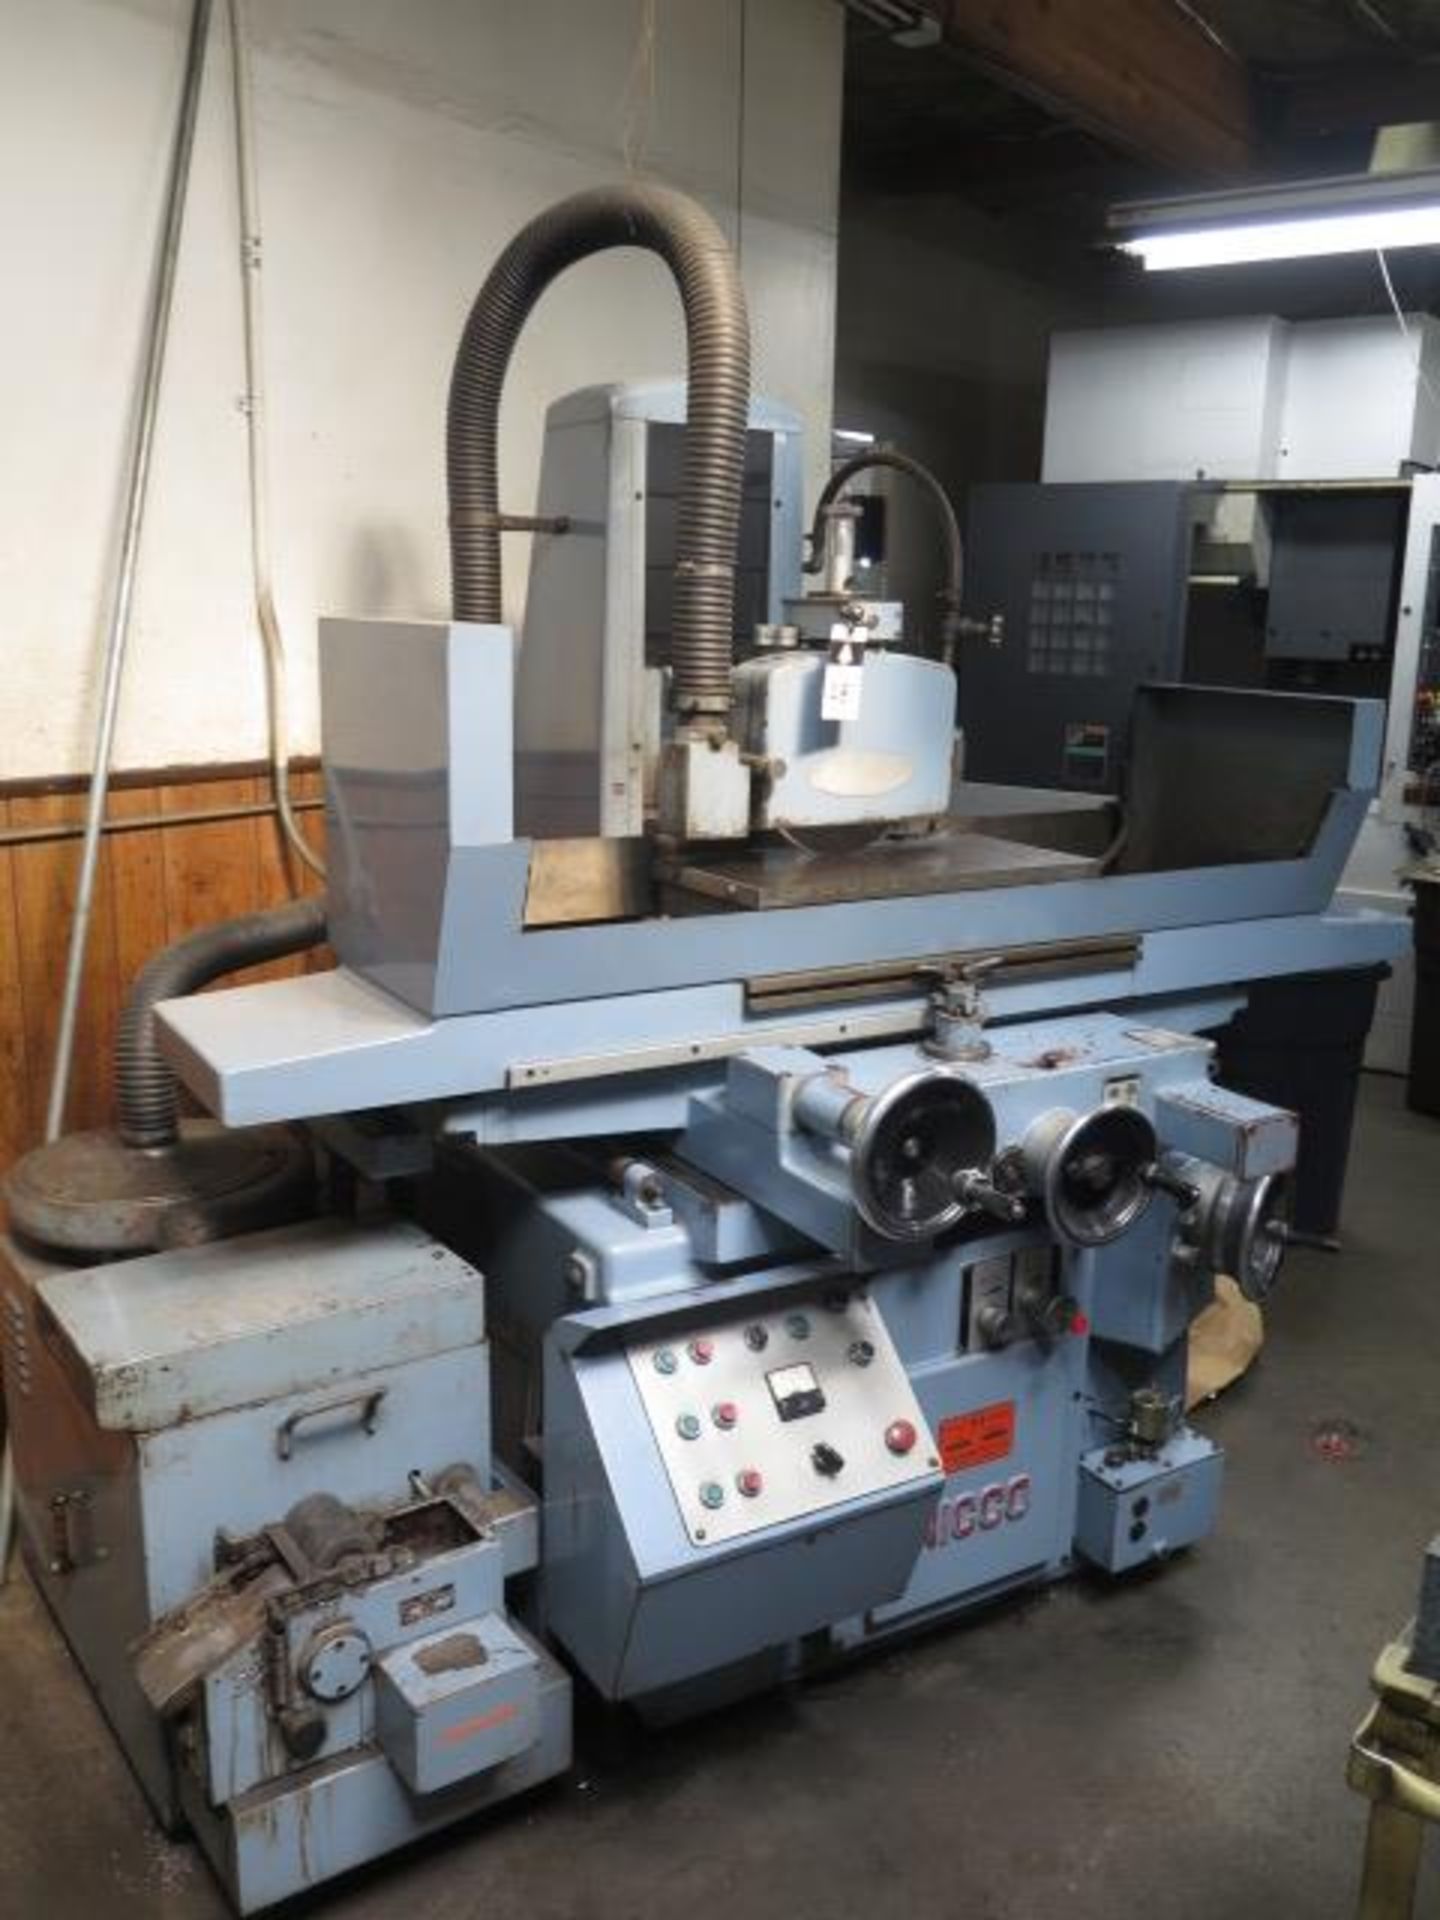 Nicco Type NSG-6H 12” x 24” Automatic Hydraulic Surface Grinder s/n C3406 w/ 12” x 24”, SOLD AS IS